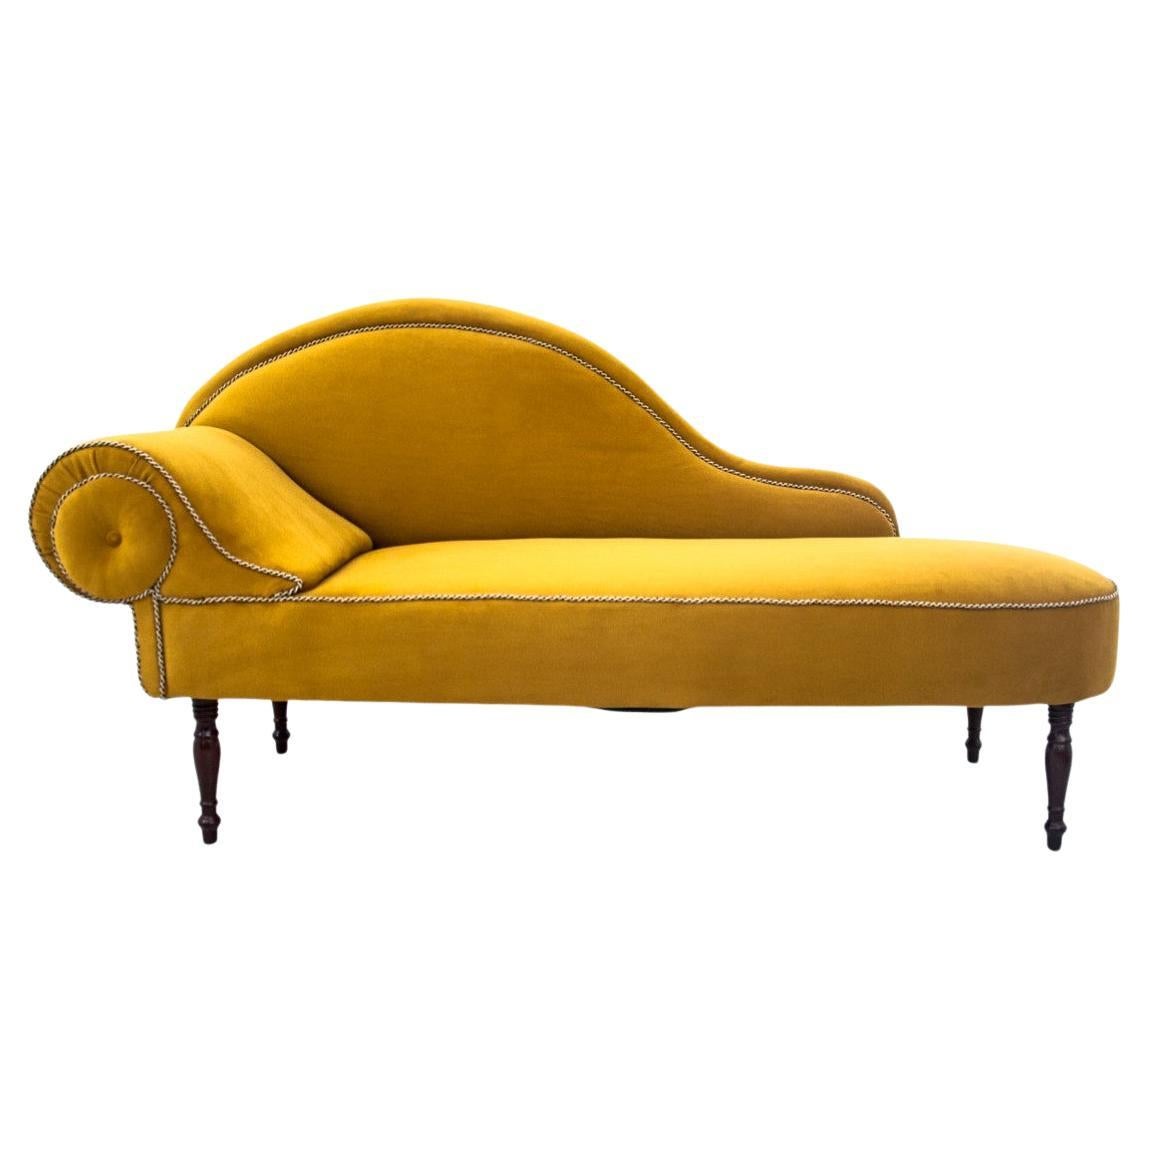 Unique yellow chaise longue, Northern Europe, circa 1900 For Sale